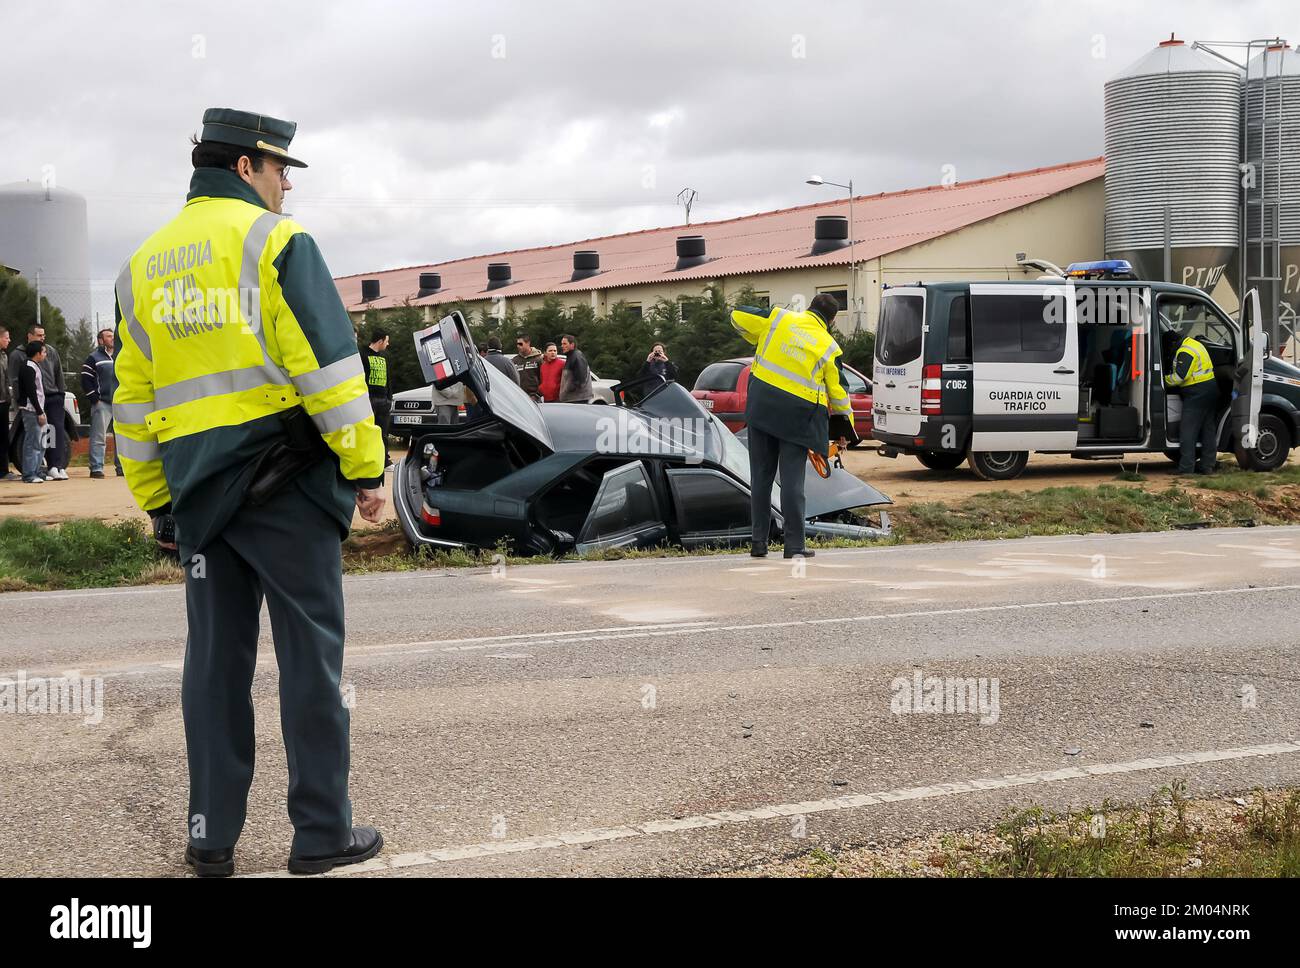 Civil Guard police guard a vehicle after a traffic accident with injuries. Stock Photo